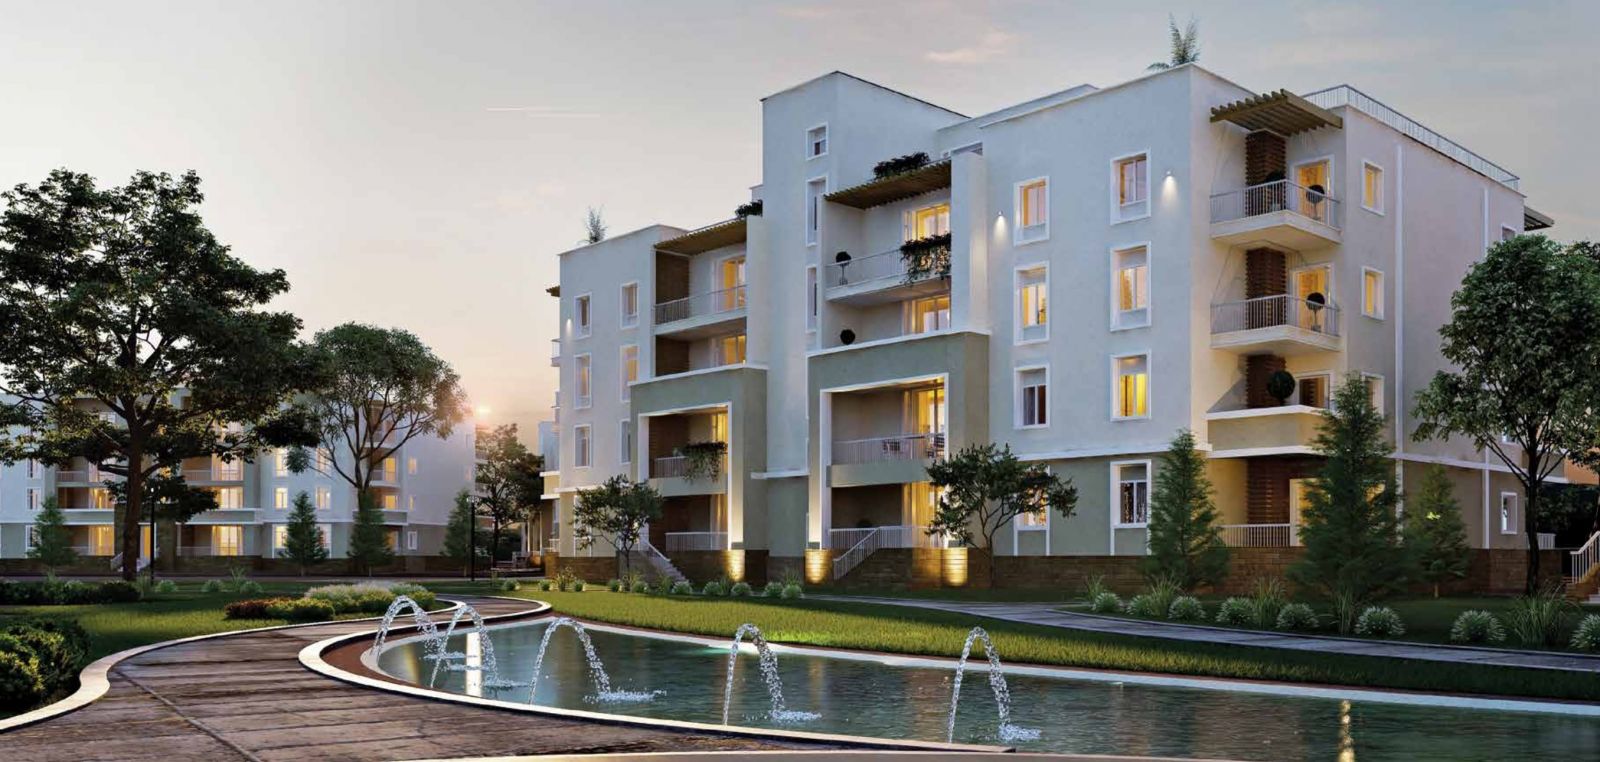 With an area of 224 m², apartments for sale in October Plaza